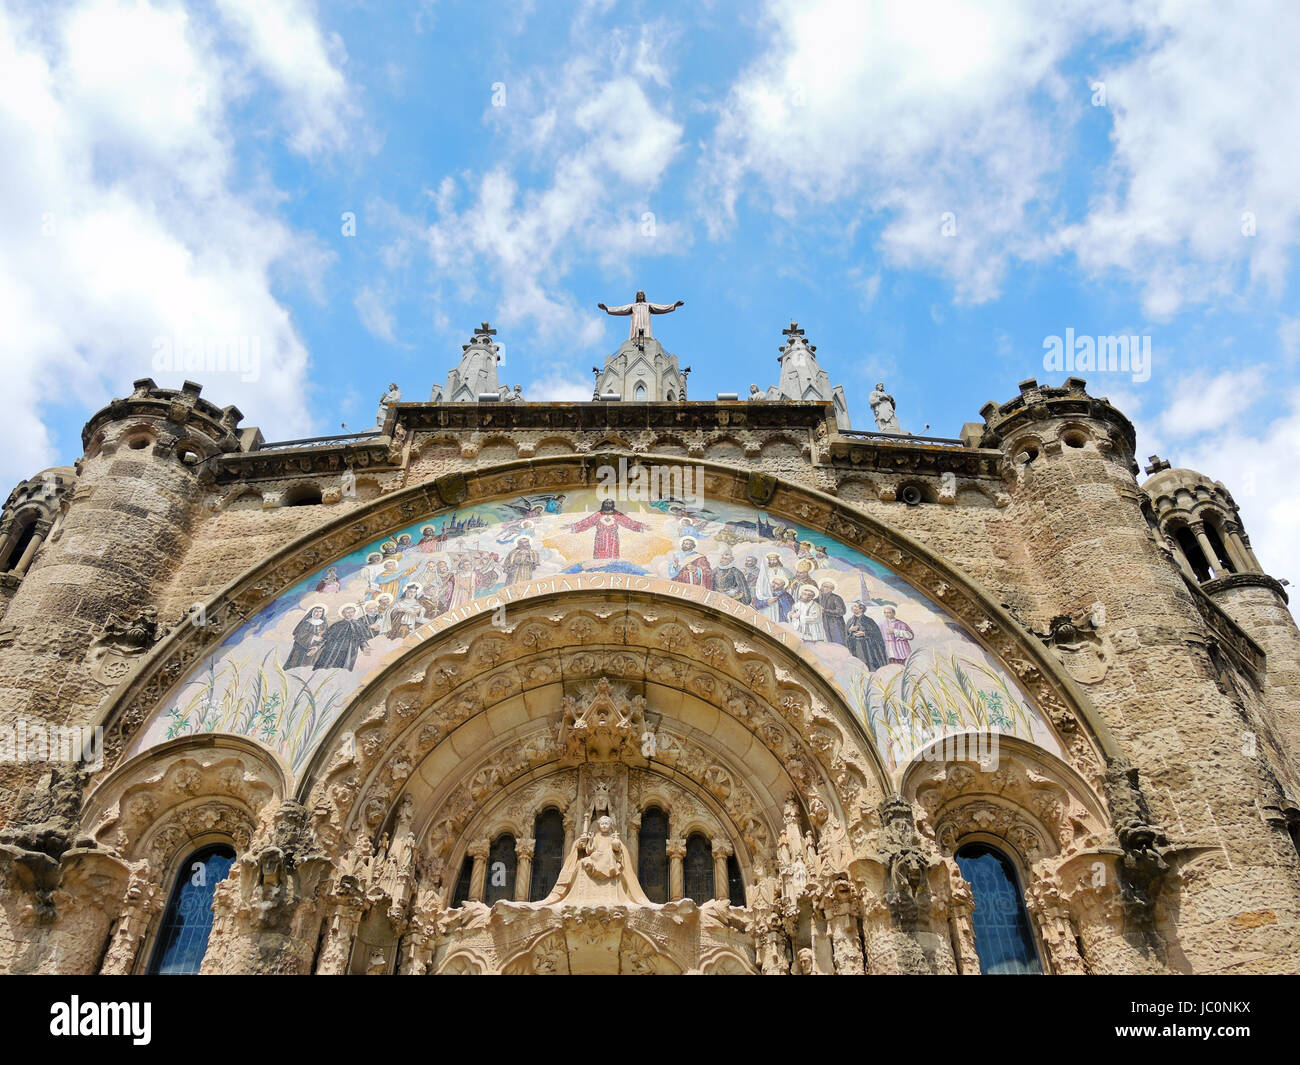 BARCELONA, SPAIN - AUGUST 14, 2013: gate of Expiatory Church of the Sacred Heart of Jesus, Barcelona, Spain. The building is the work of the Spanish Catalan architect Enric Sagnier. Stock Photo